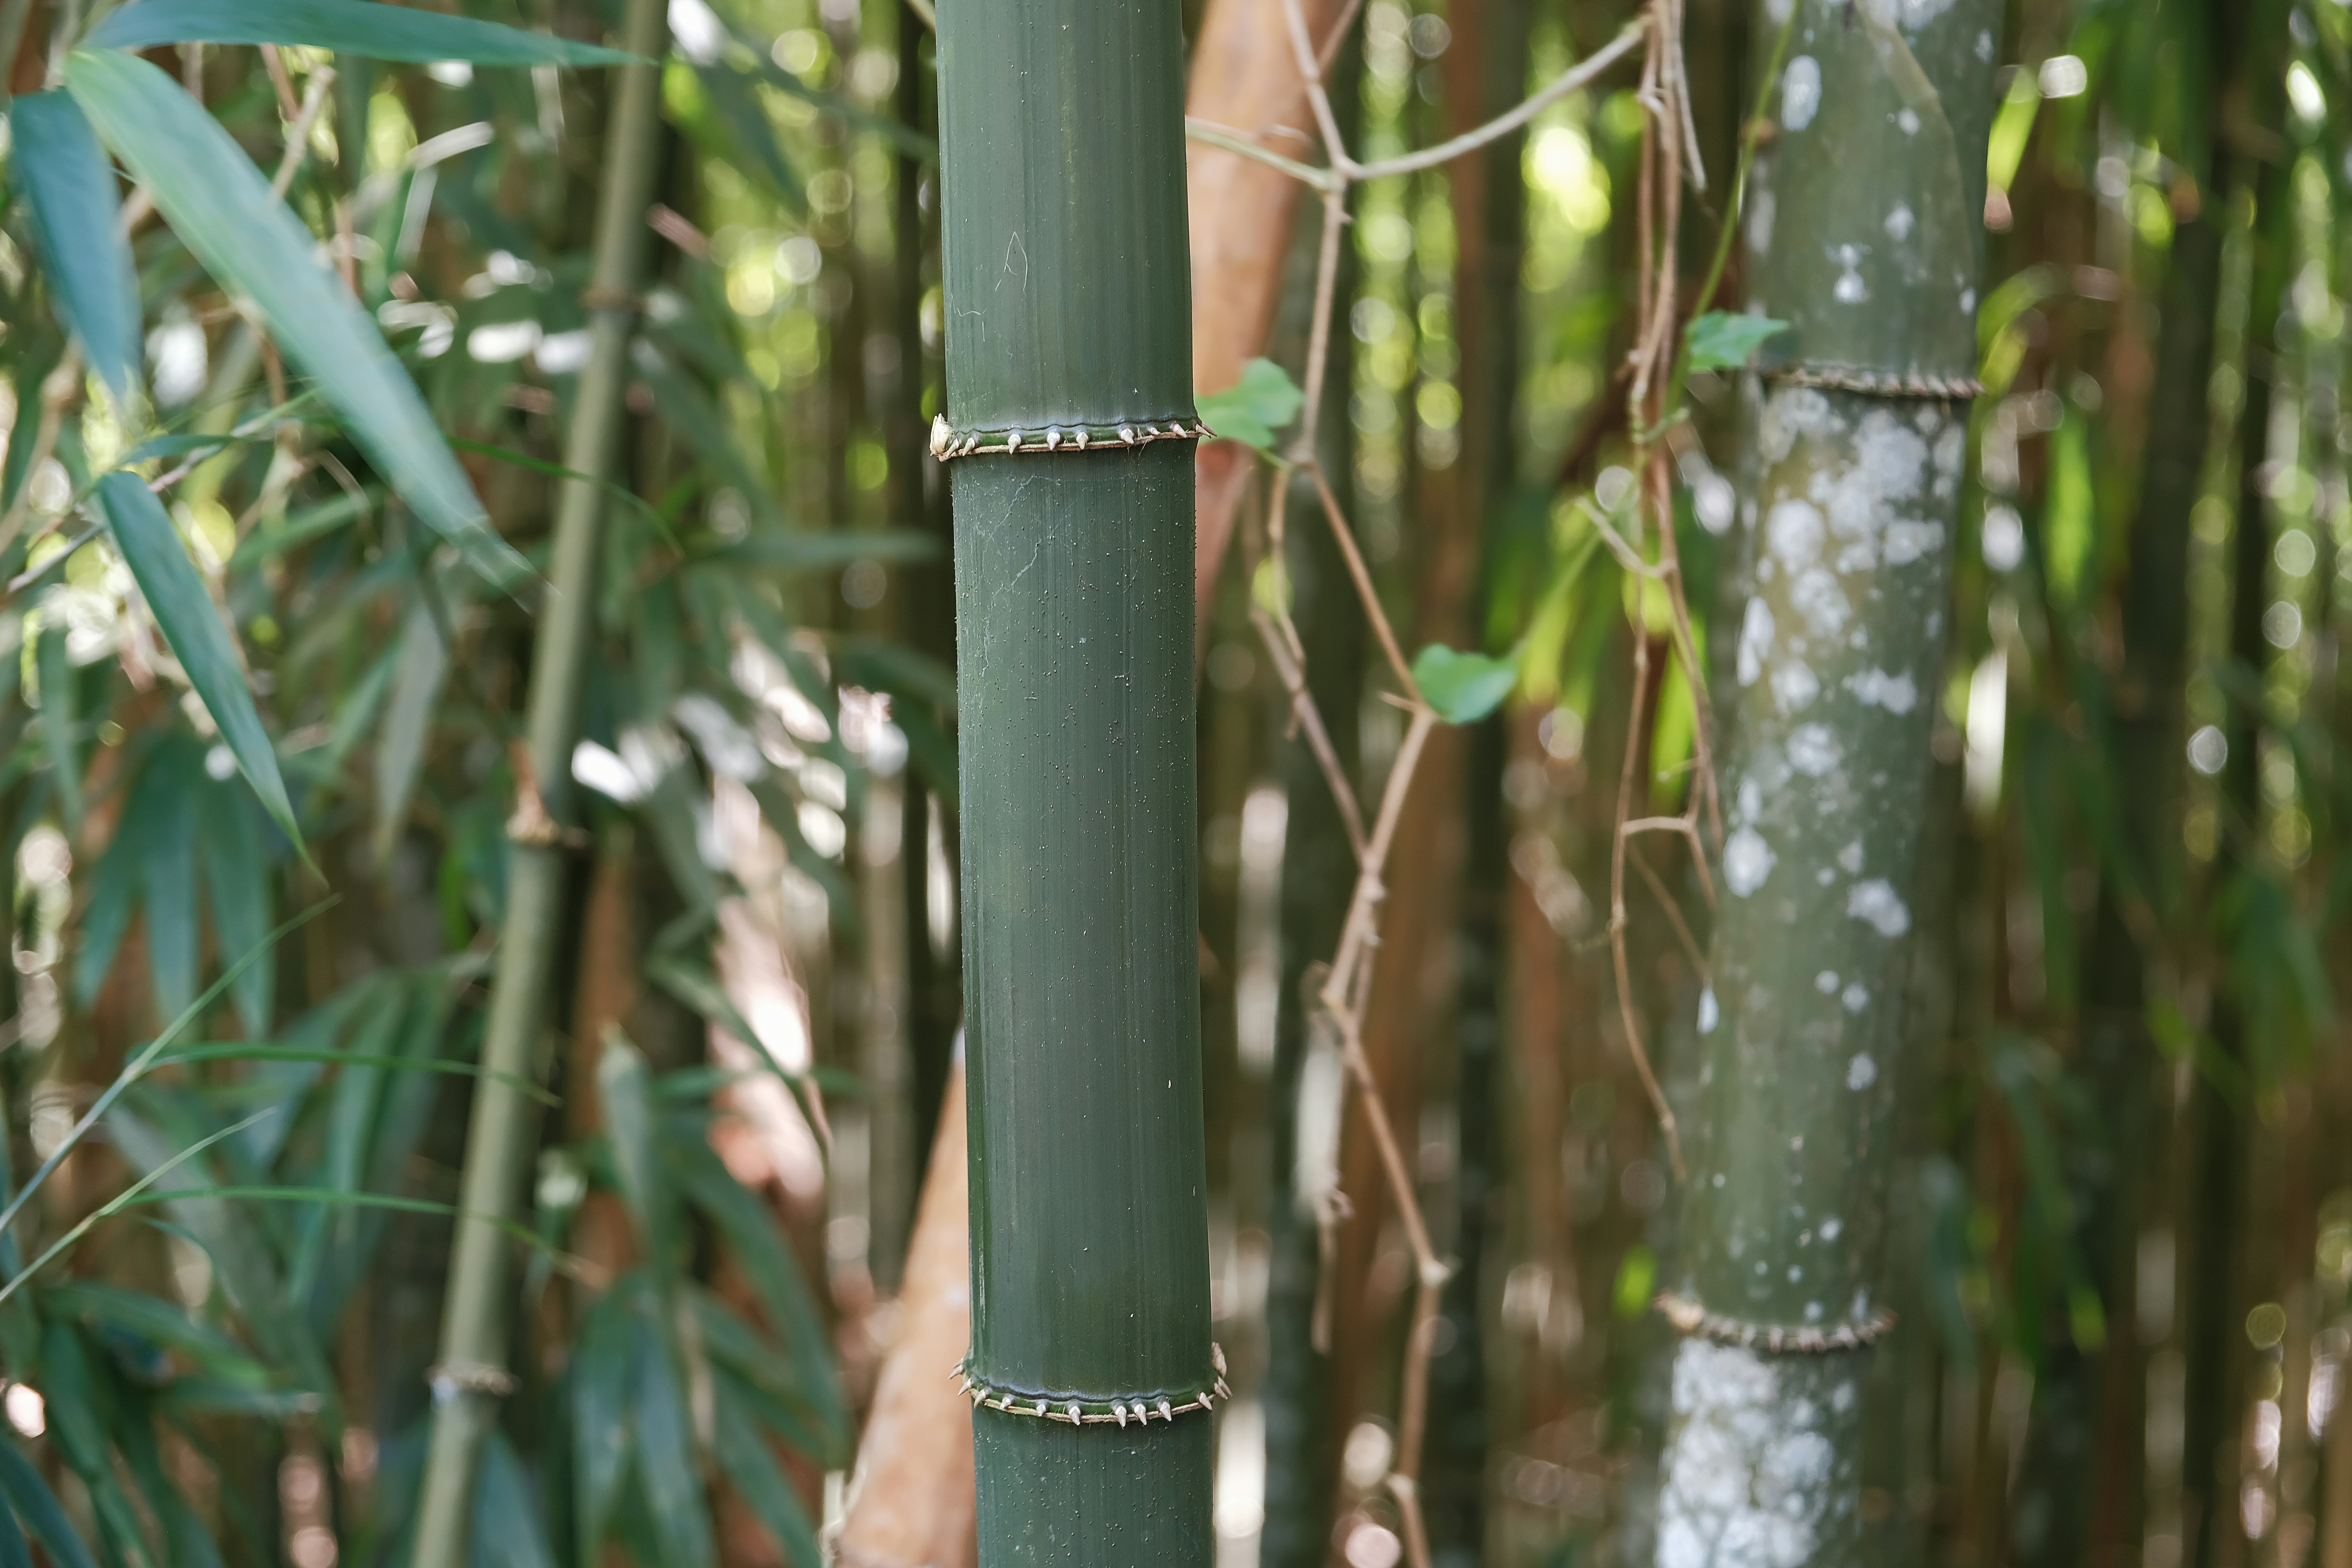 Square bamboo: round to the eye, square to the touch.